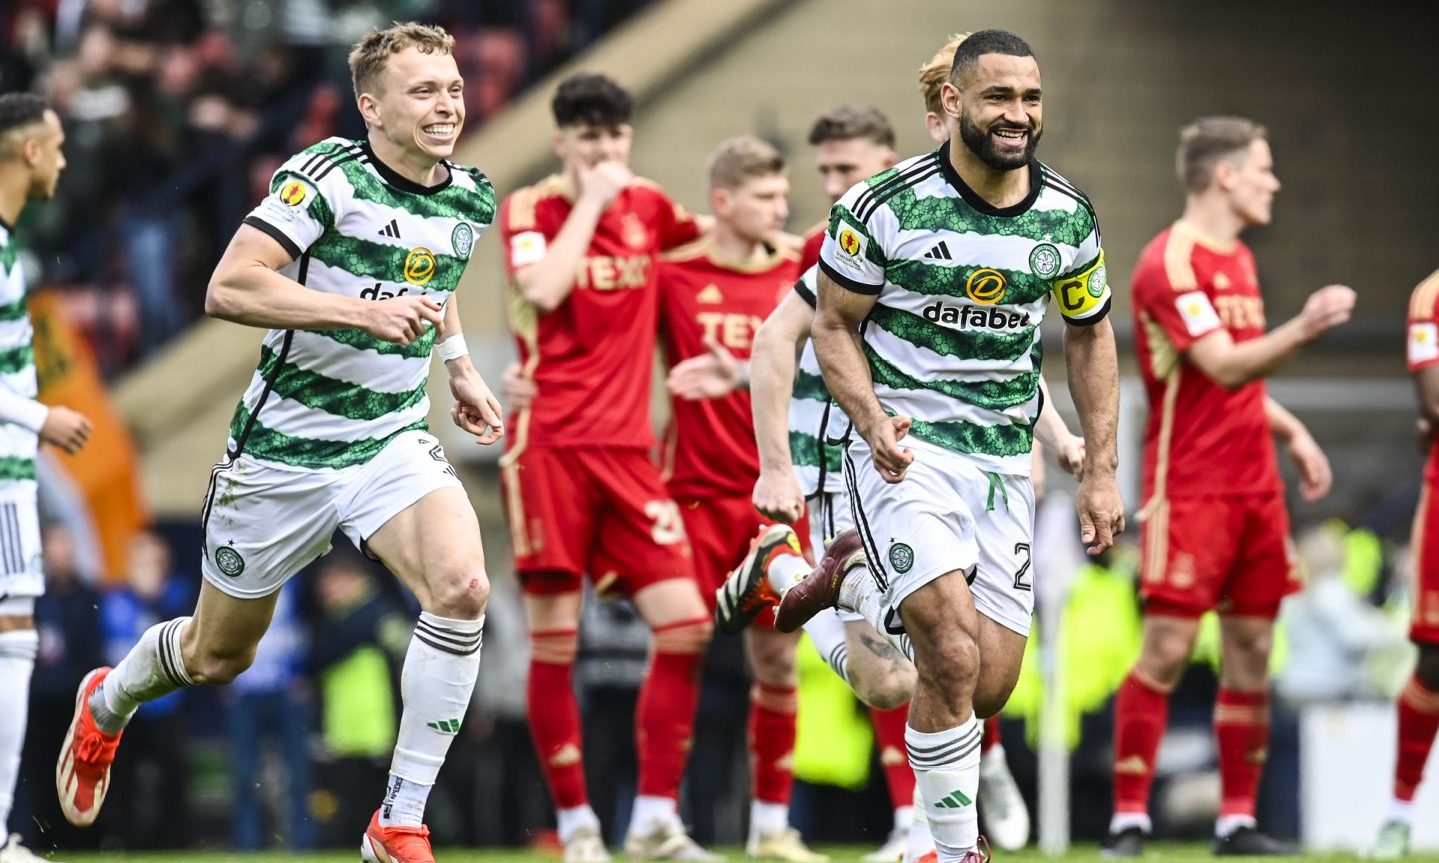 Celtic's Alistair Johnston (L) and Cameron Carter-Vickers celebrate at full time after beating Aberdeen 6-5 on penalties. Image: SNS